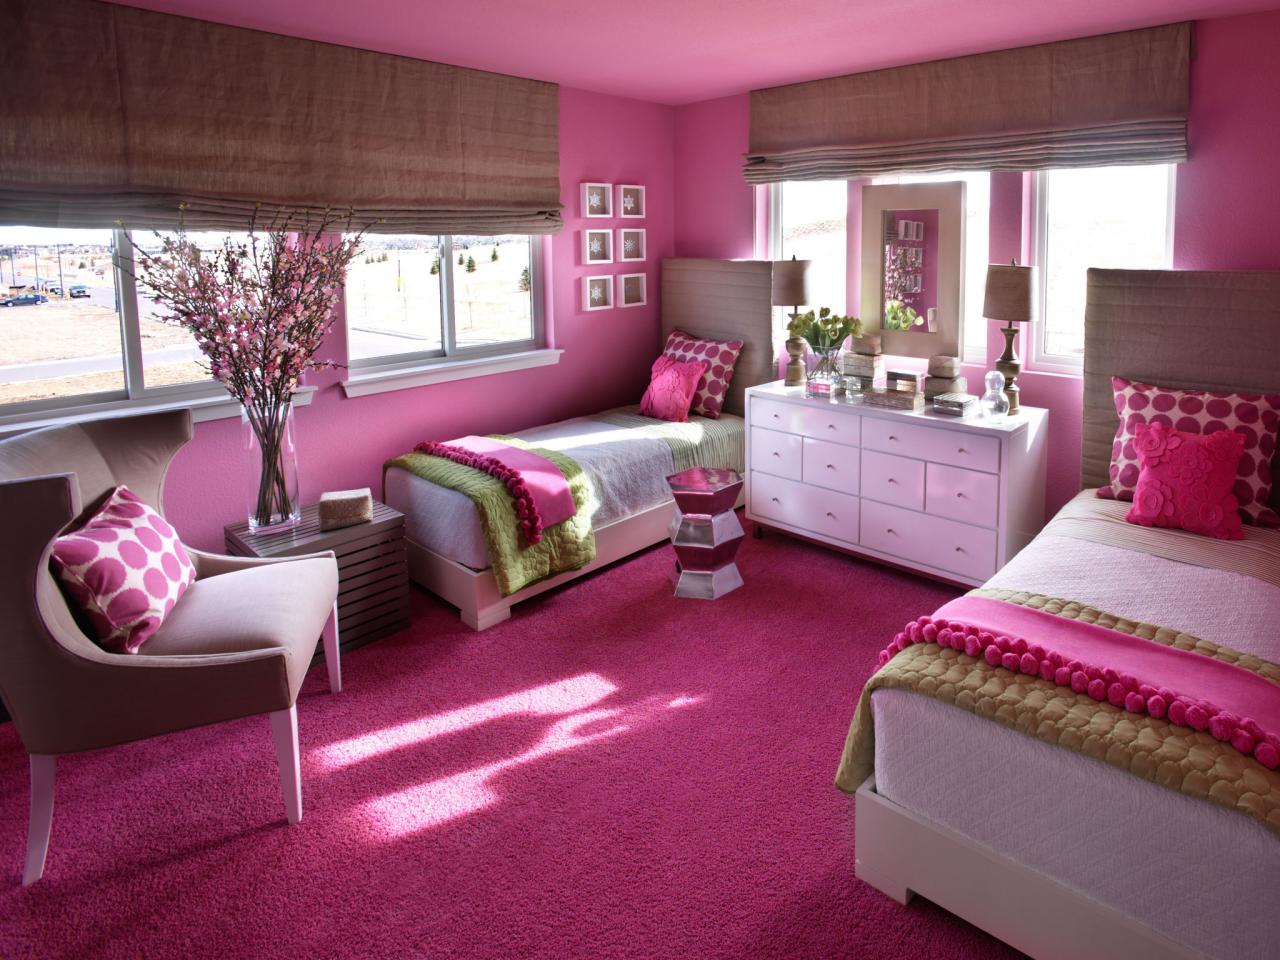 Teenage Bedroom Color Schemes Pictures, Options & Ideas